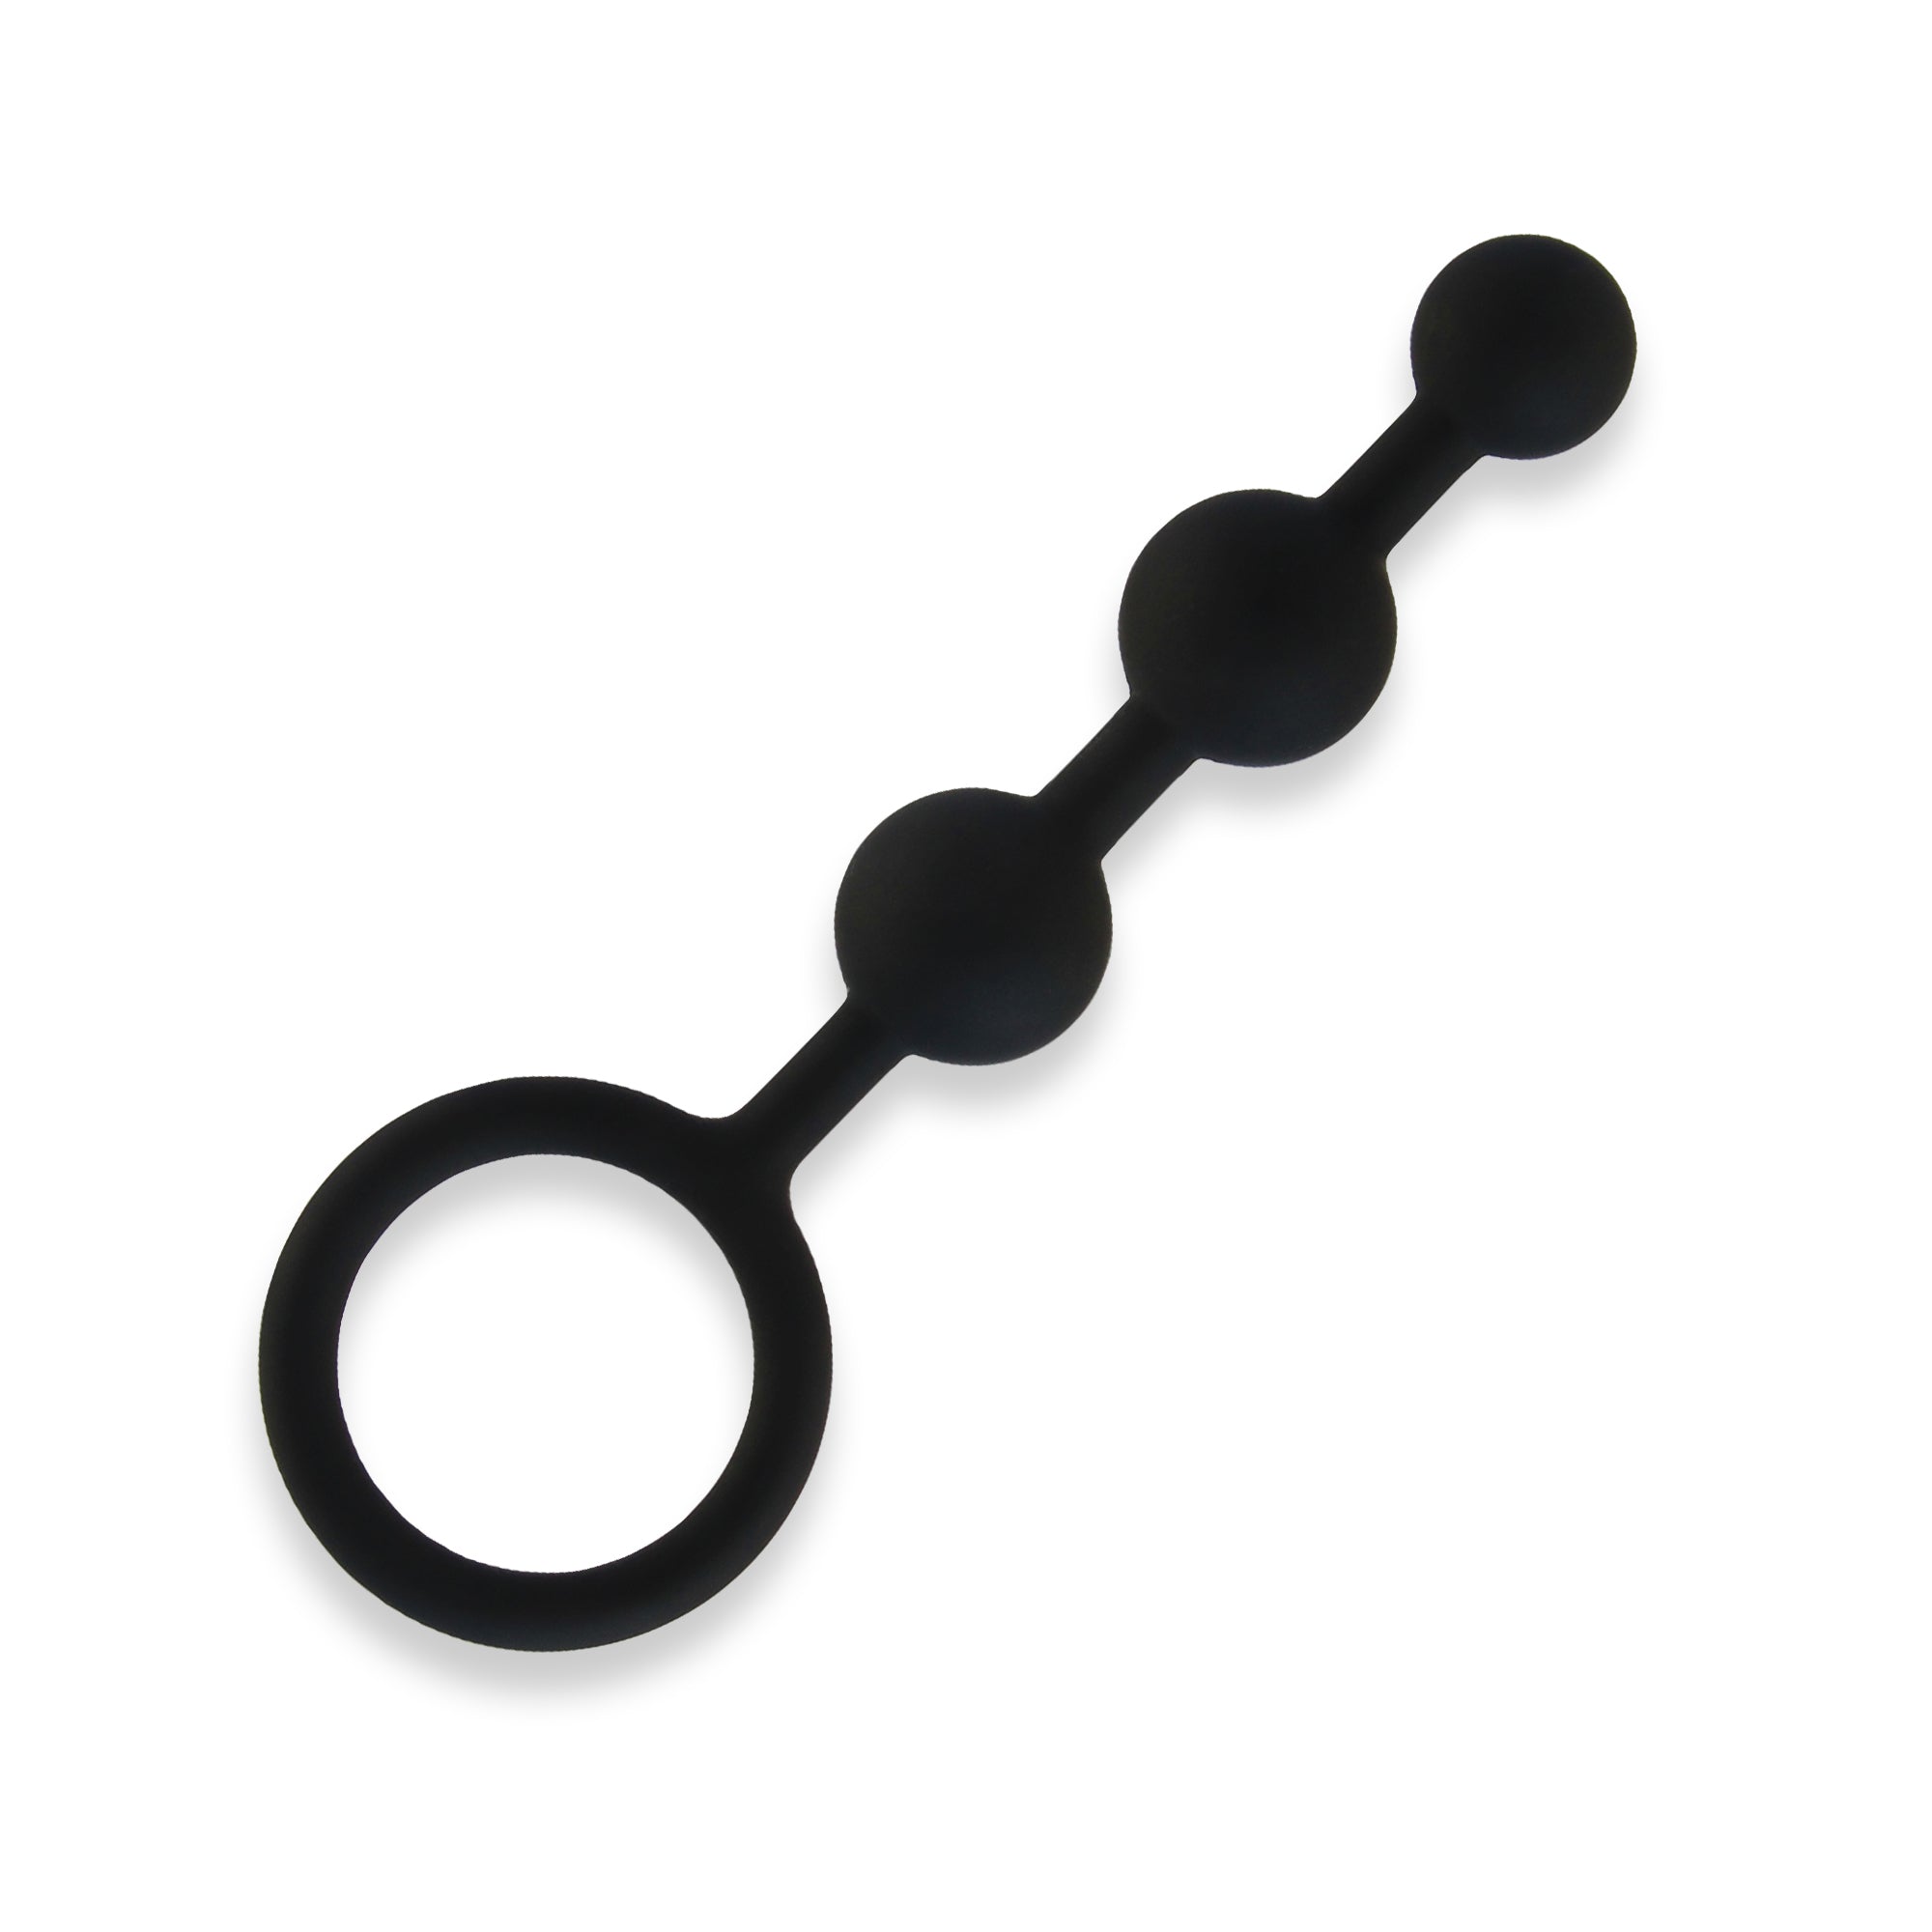 Hustler Body-Safe Silicone Anal Beads (3 Beads) in Black at glastoy.com